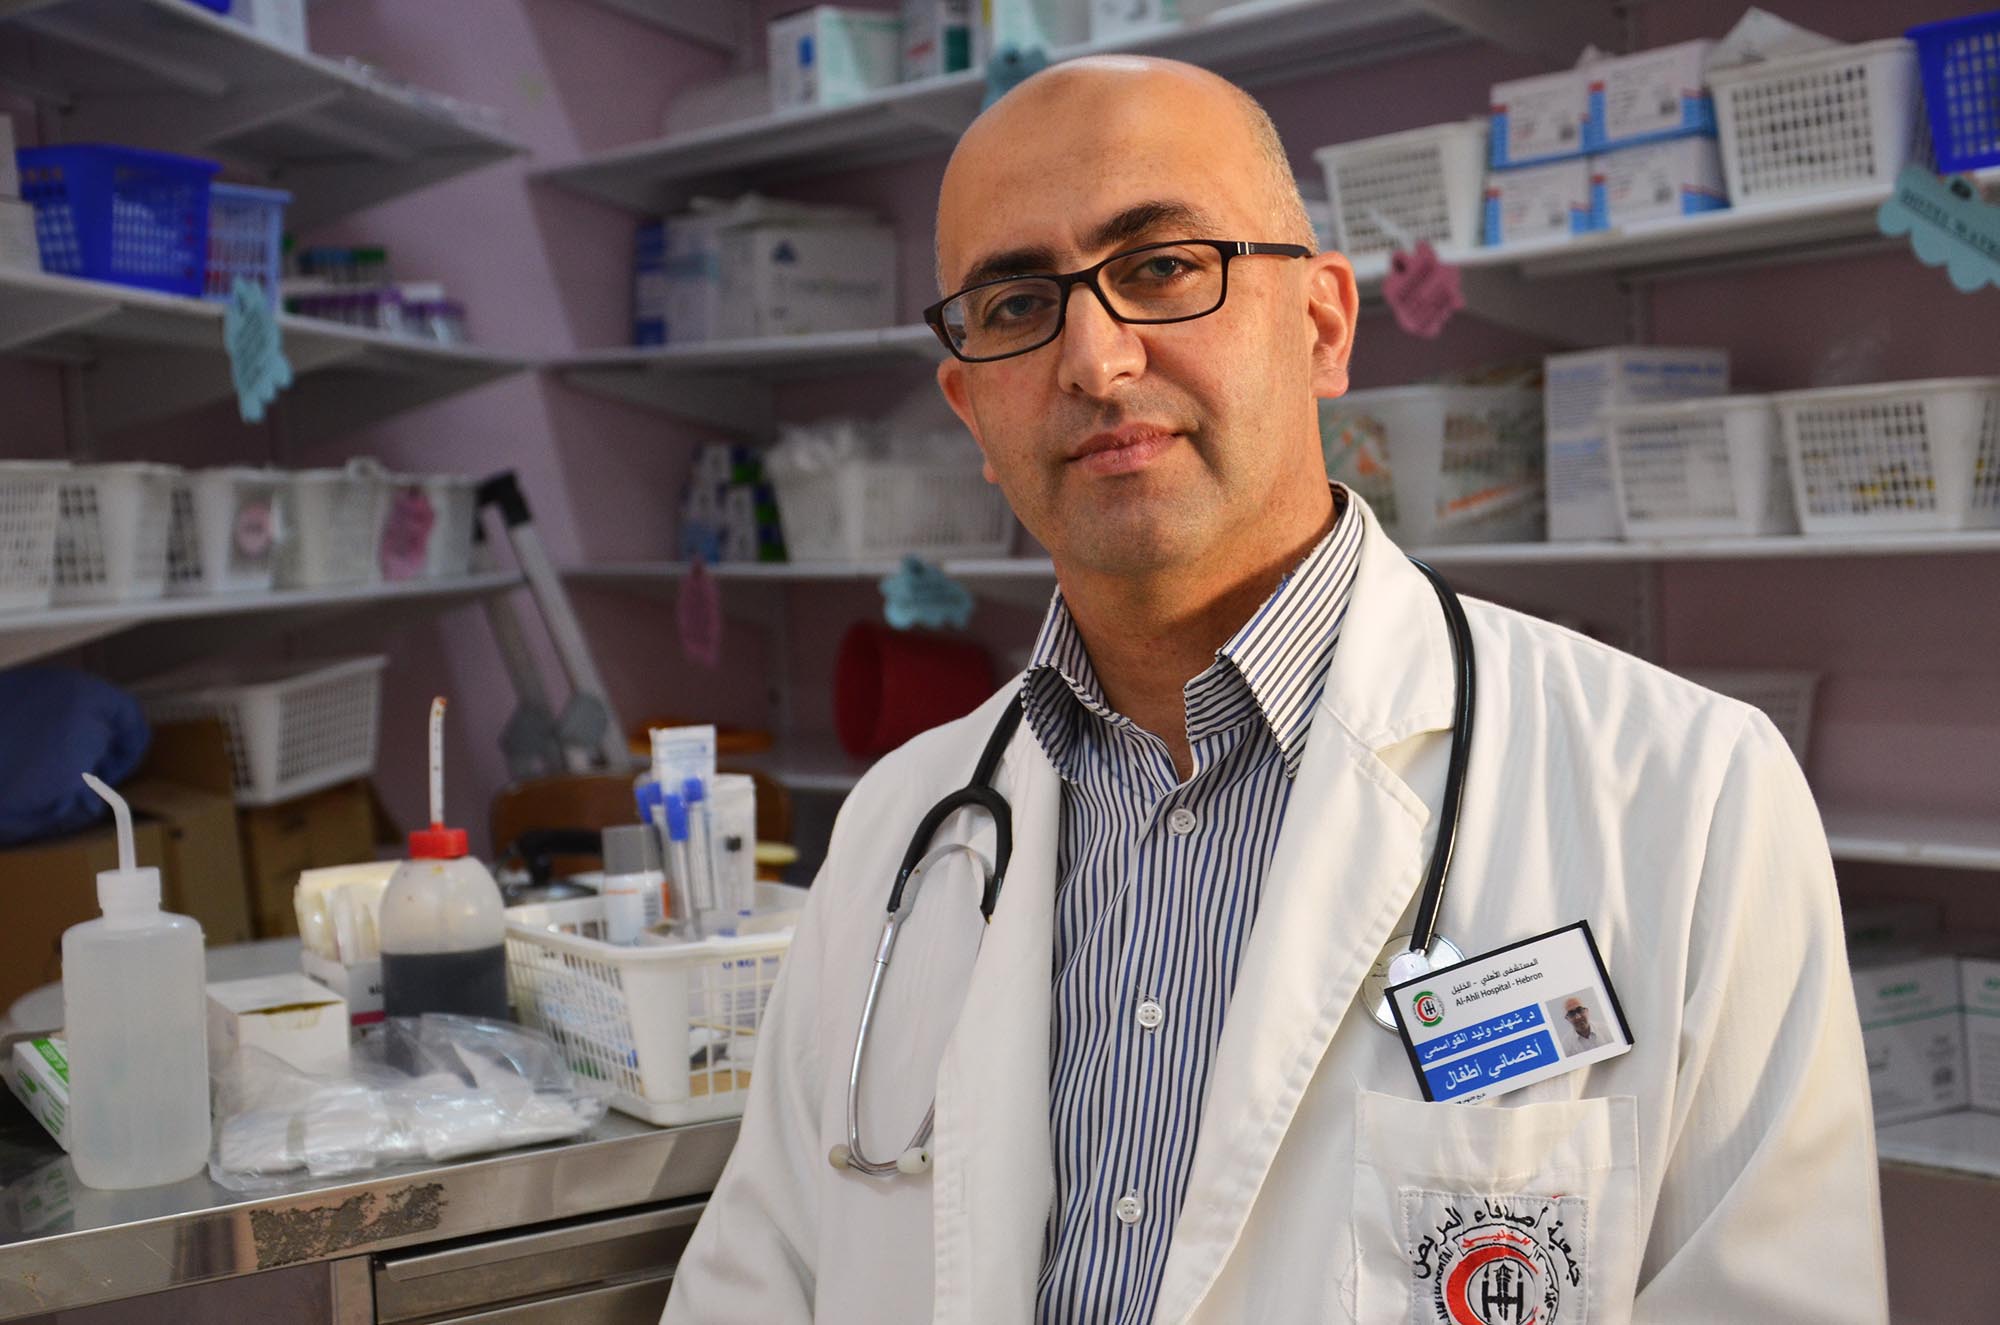 Dr. Shihab Qawasmi is a Palestinian pediatrician with 10 years of experience.